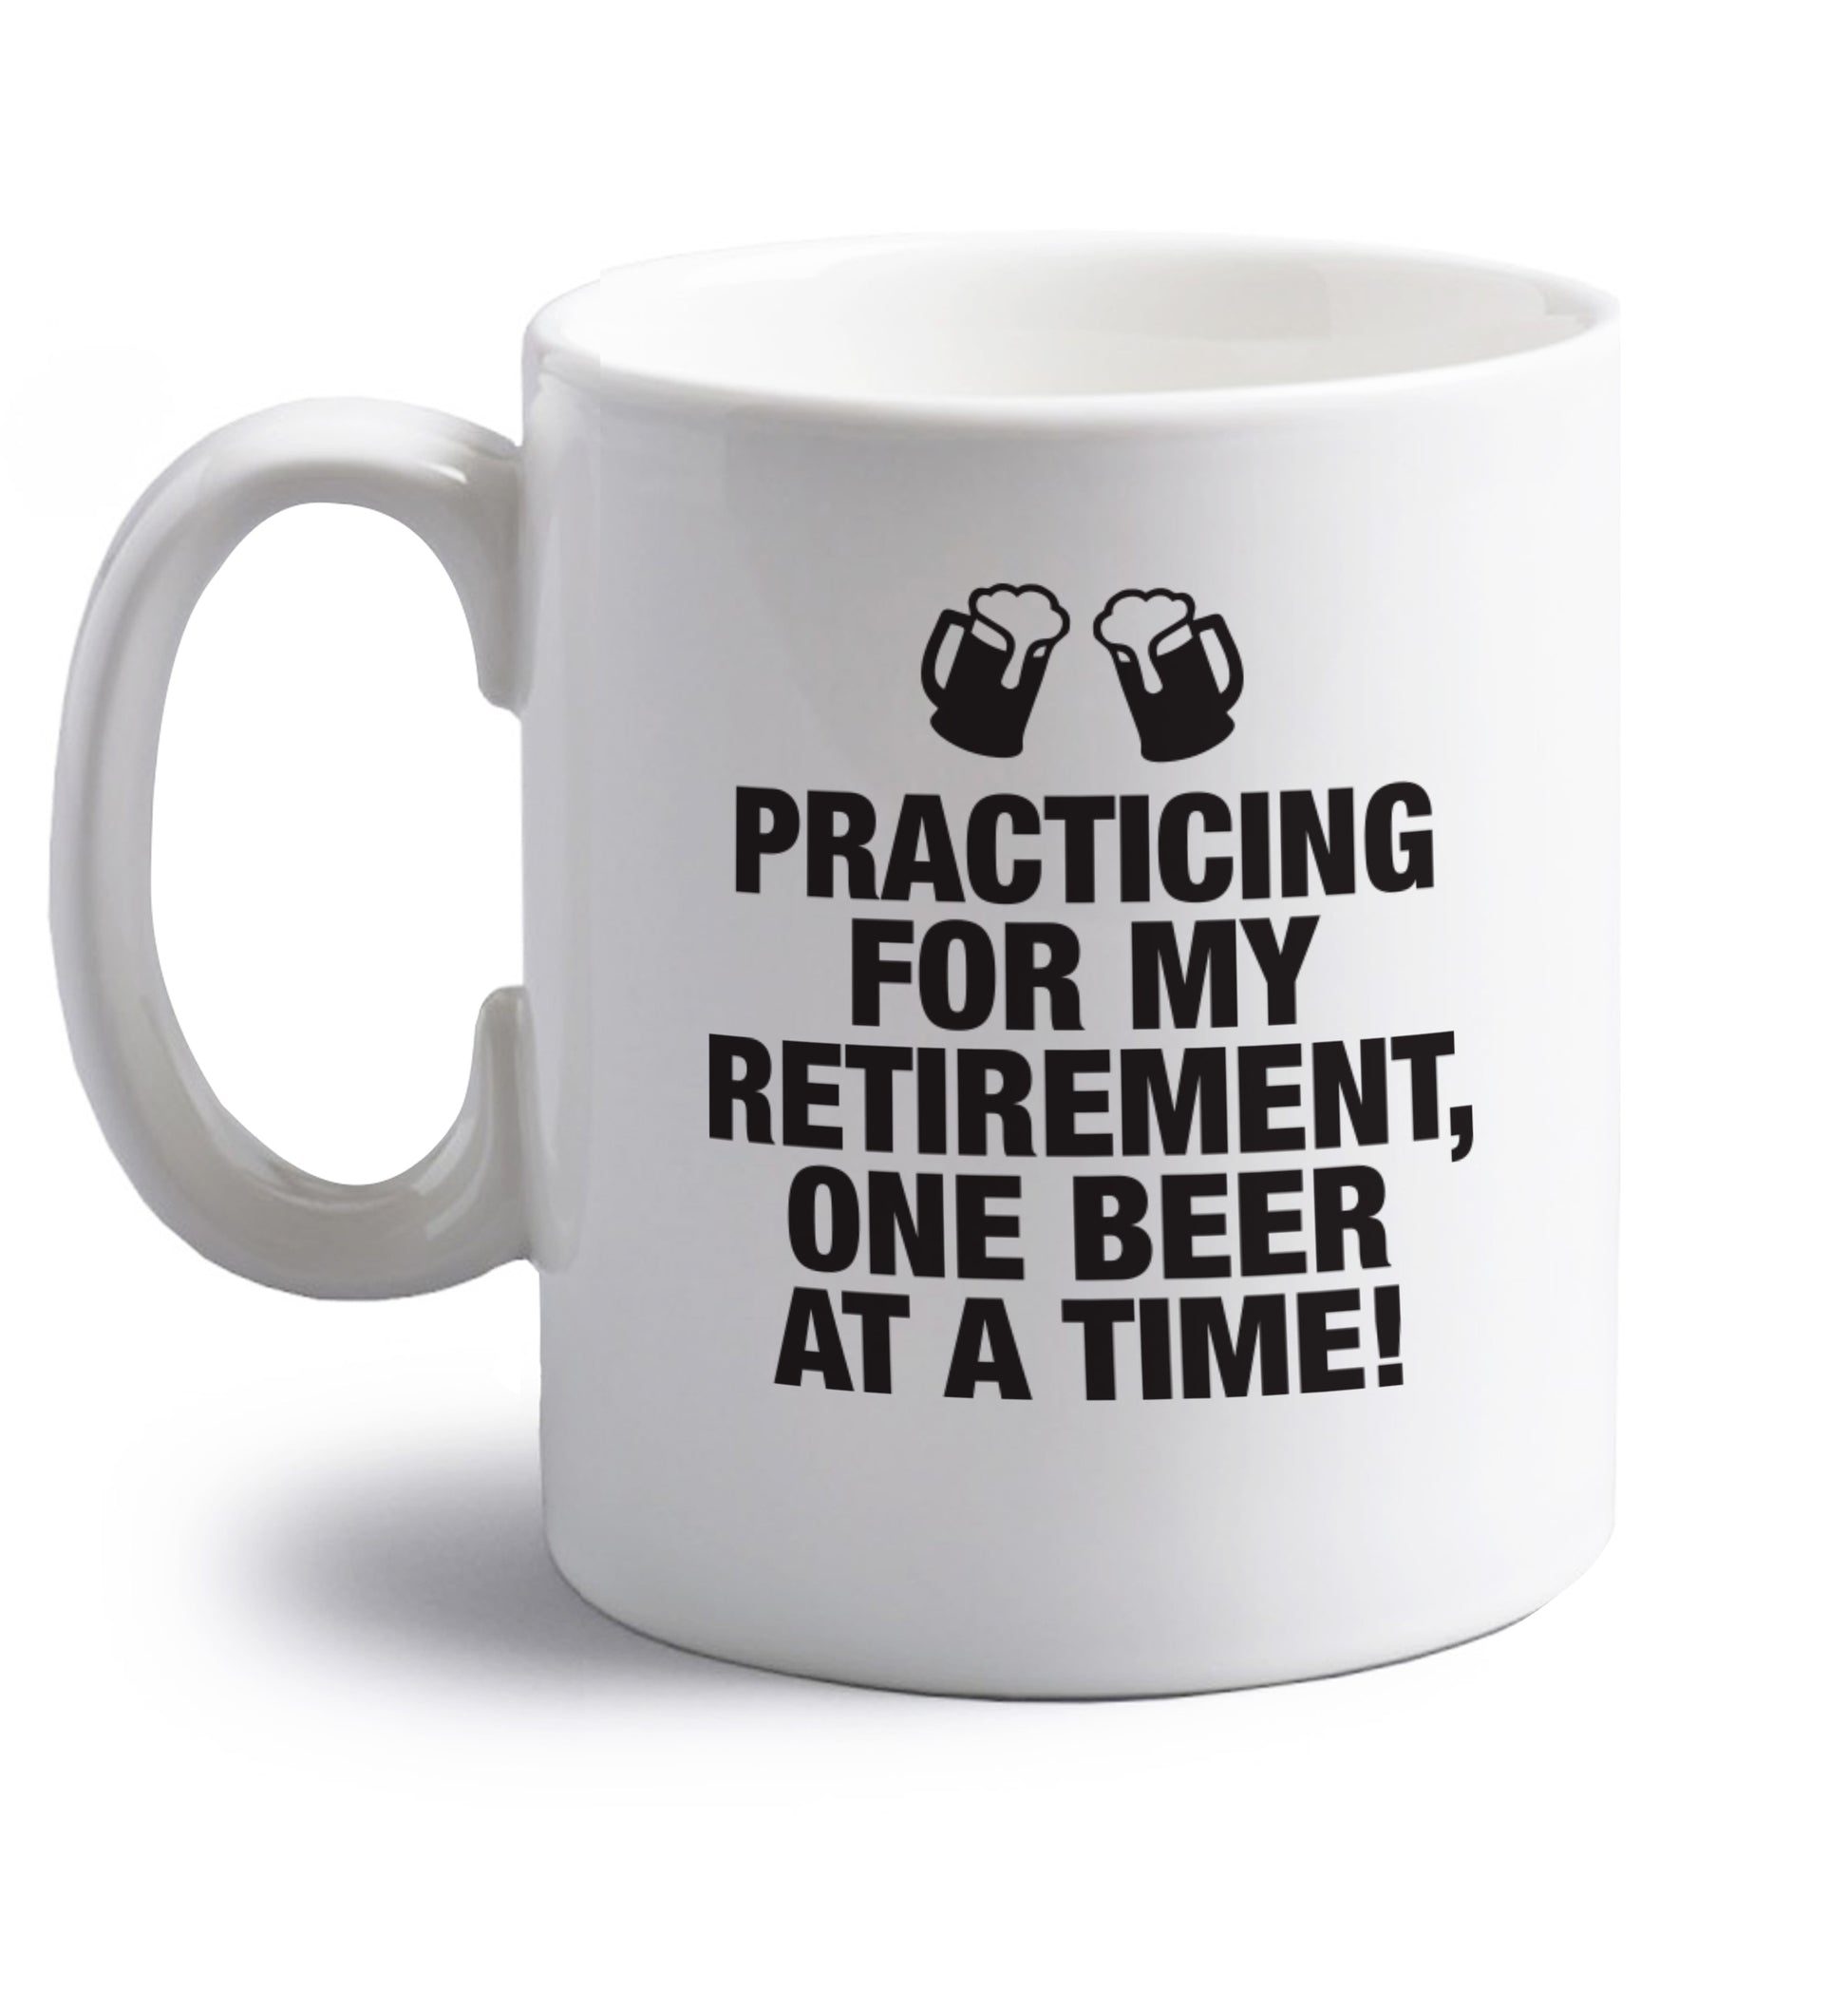 Practicing my retirement one beer at a time right handed white ceramic mug 